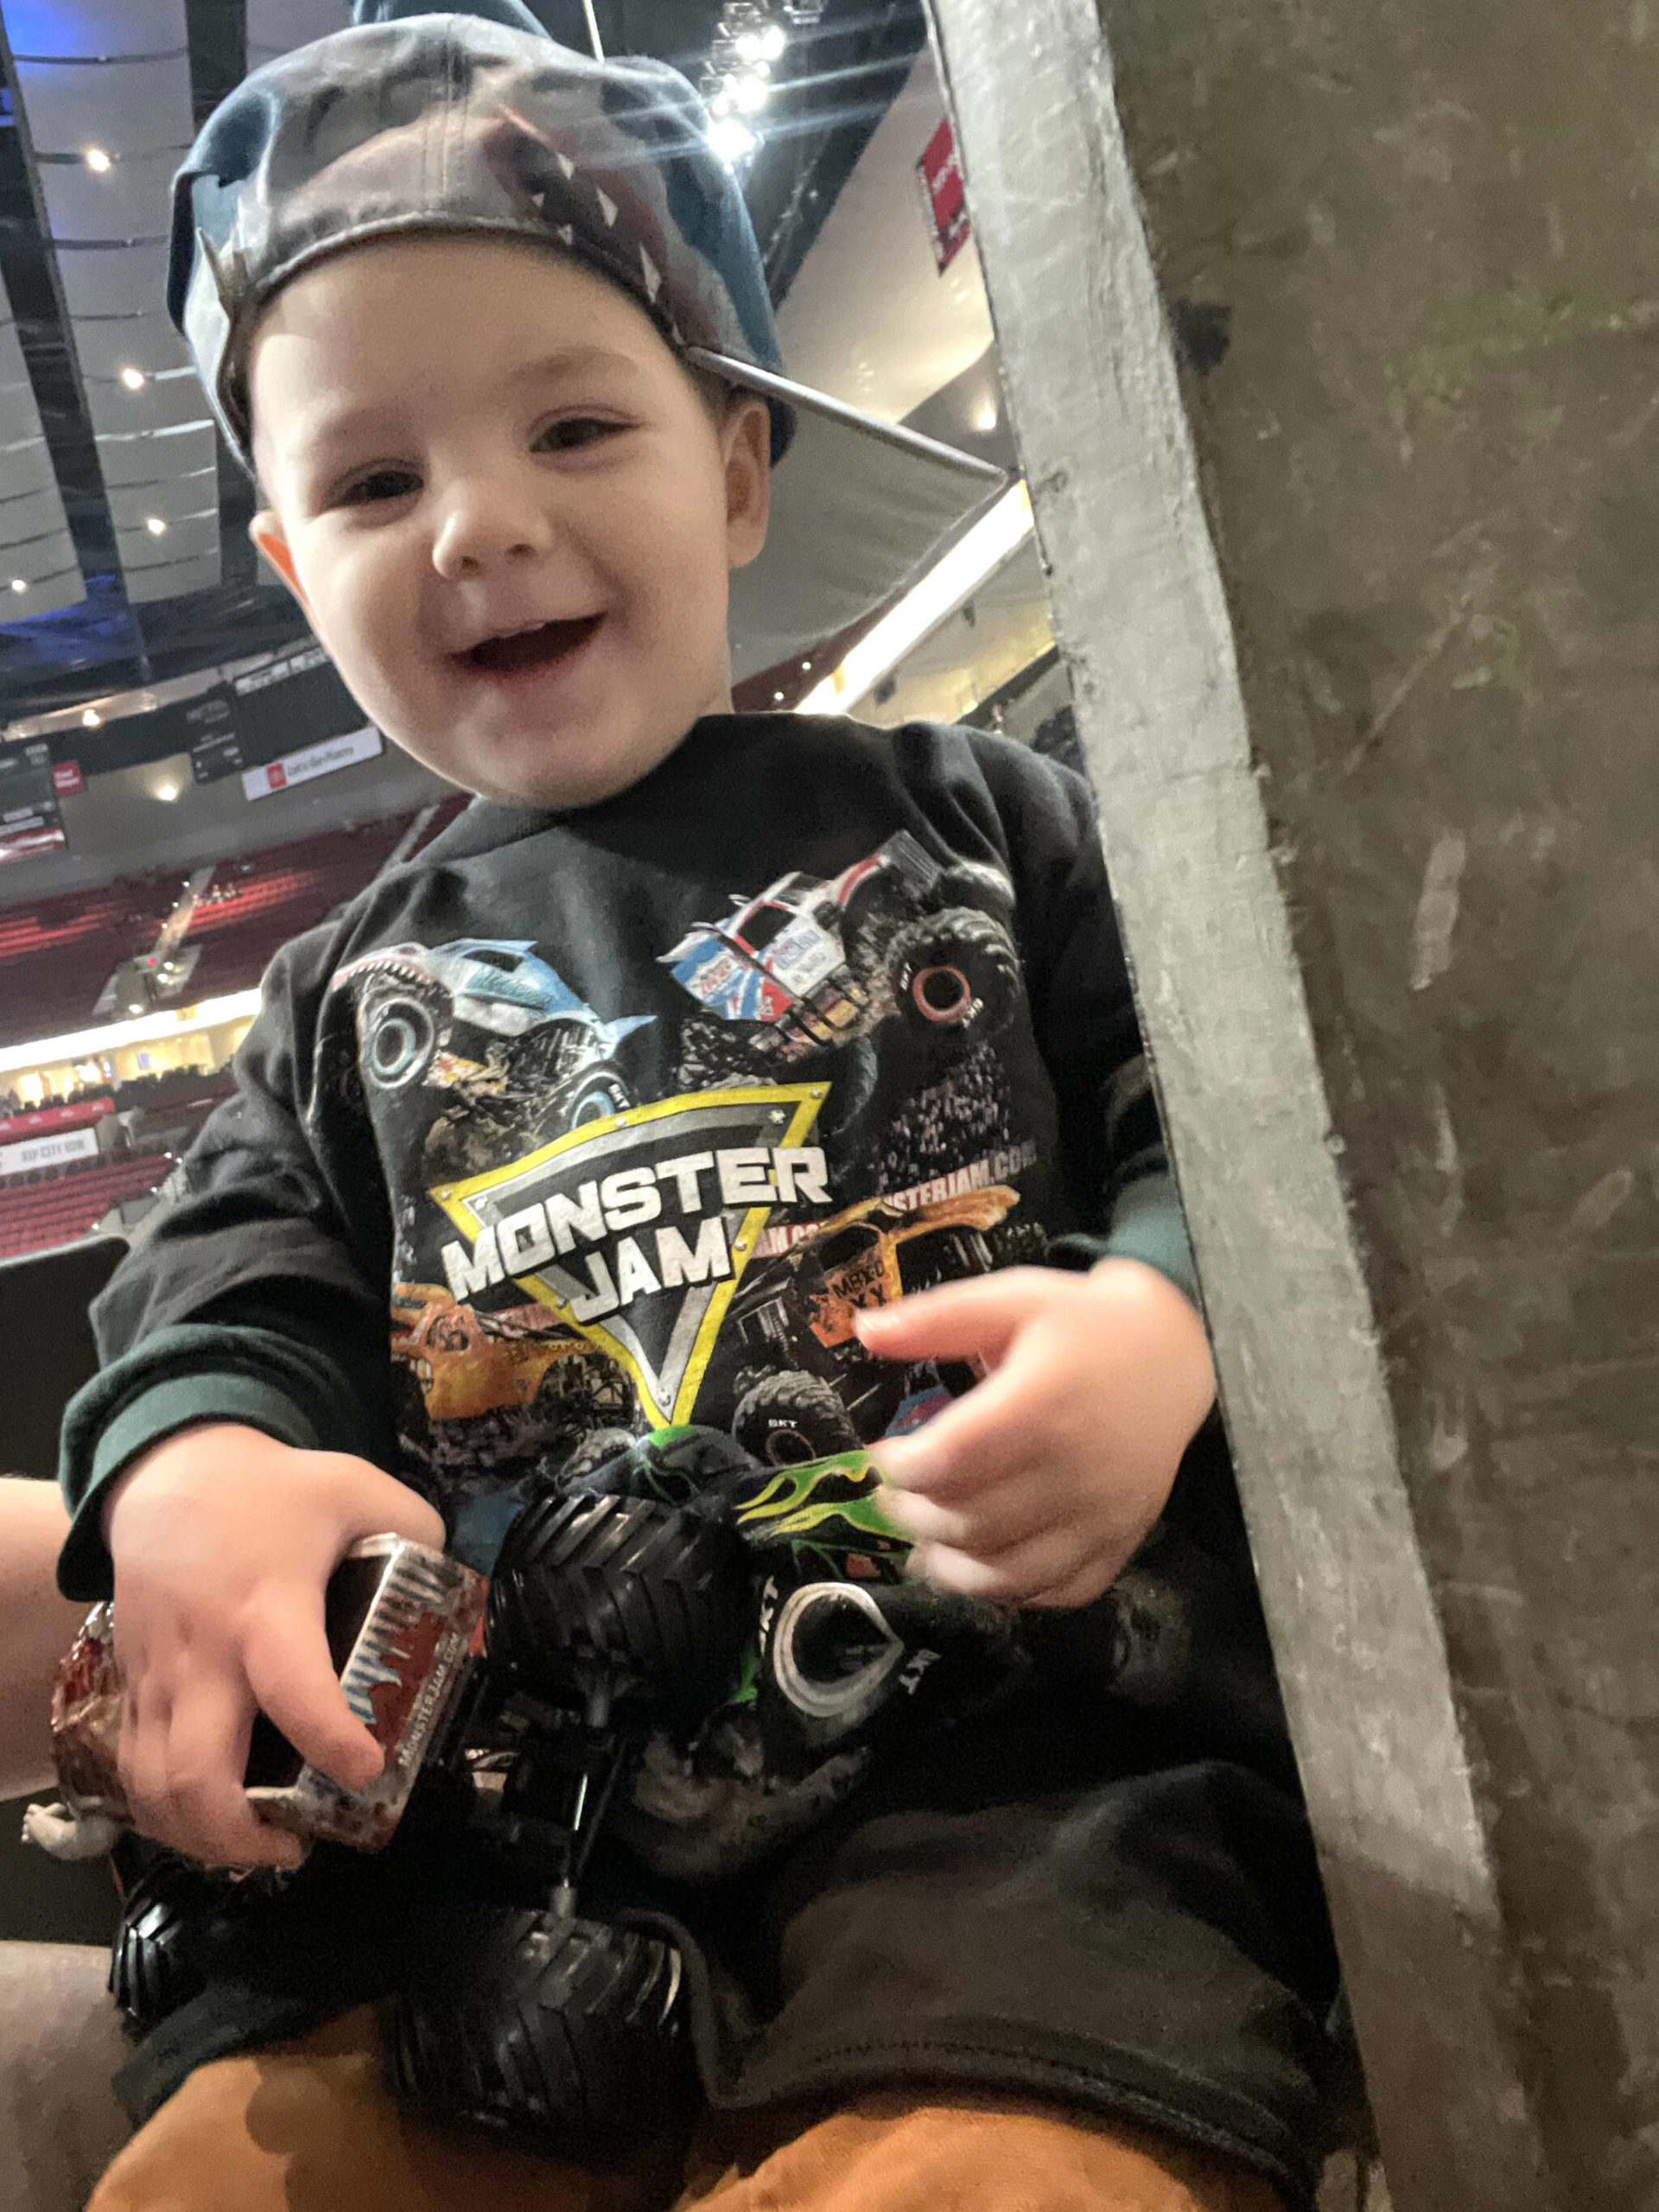 Courtesy photo
Sterling Hamilton, now two years and four months old, seen at Monster Jam in Portland. Sterling’s parents — Anthony and Heidi — took the sprightly little boy to see the huge monster trucks, because Sterling loves monster trucks.